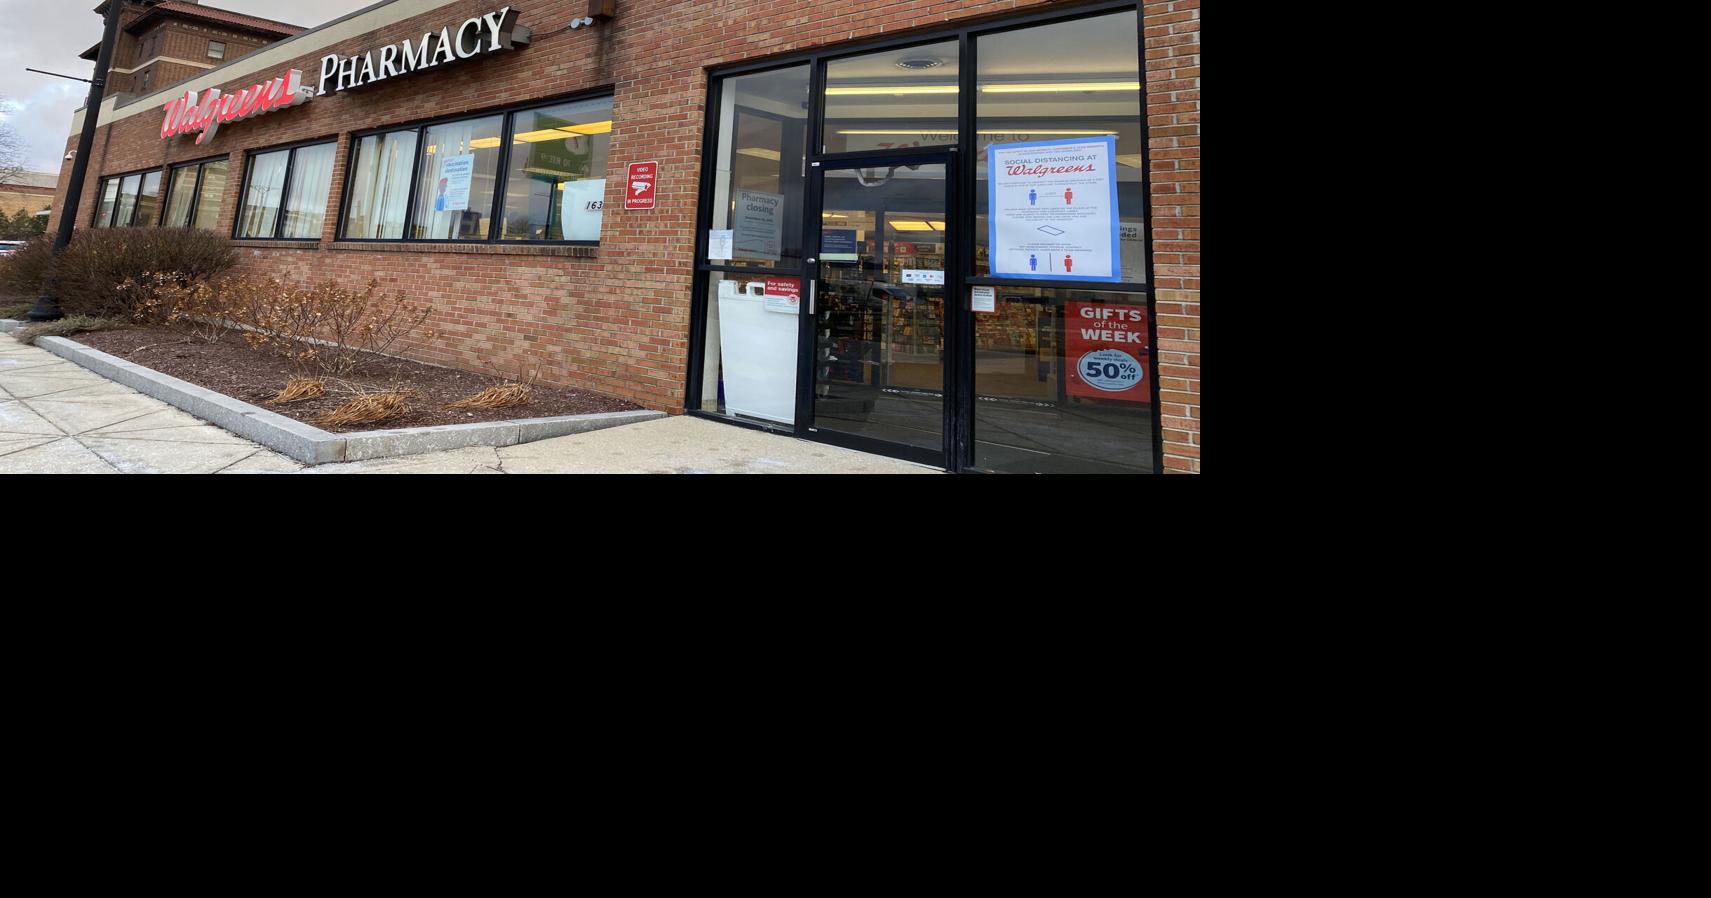 Staffing, COVID-related issues caused Walgreens to close South Street  pharmacy in Pittsfield | Local News 